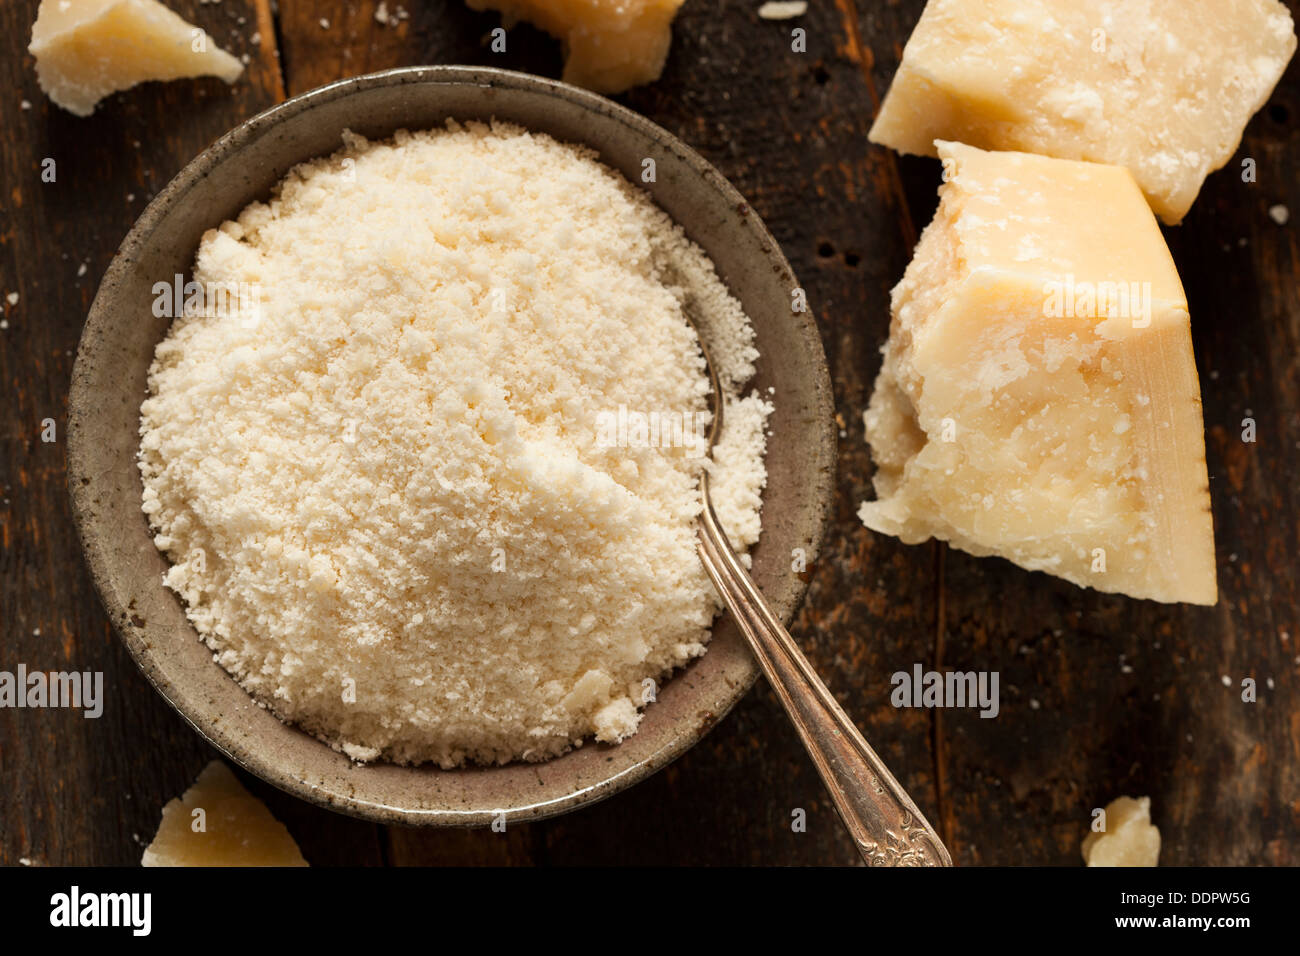 Gourmet Organic Parmesan Cheese on a Background Stock Photo